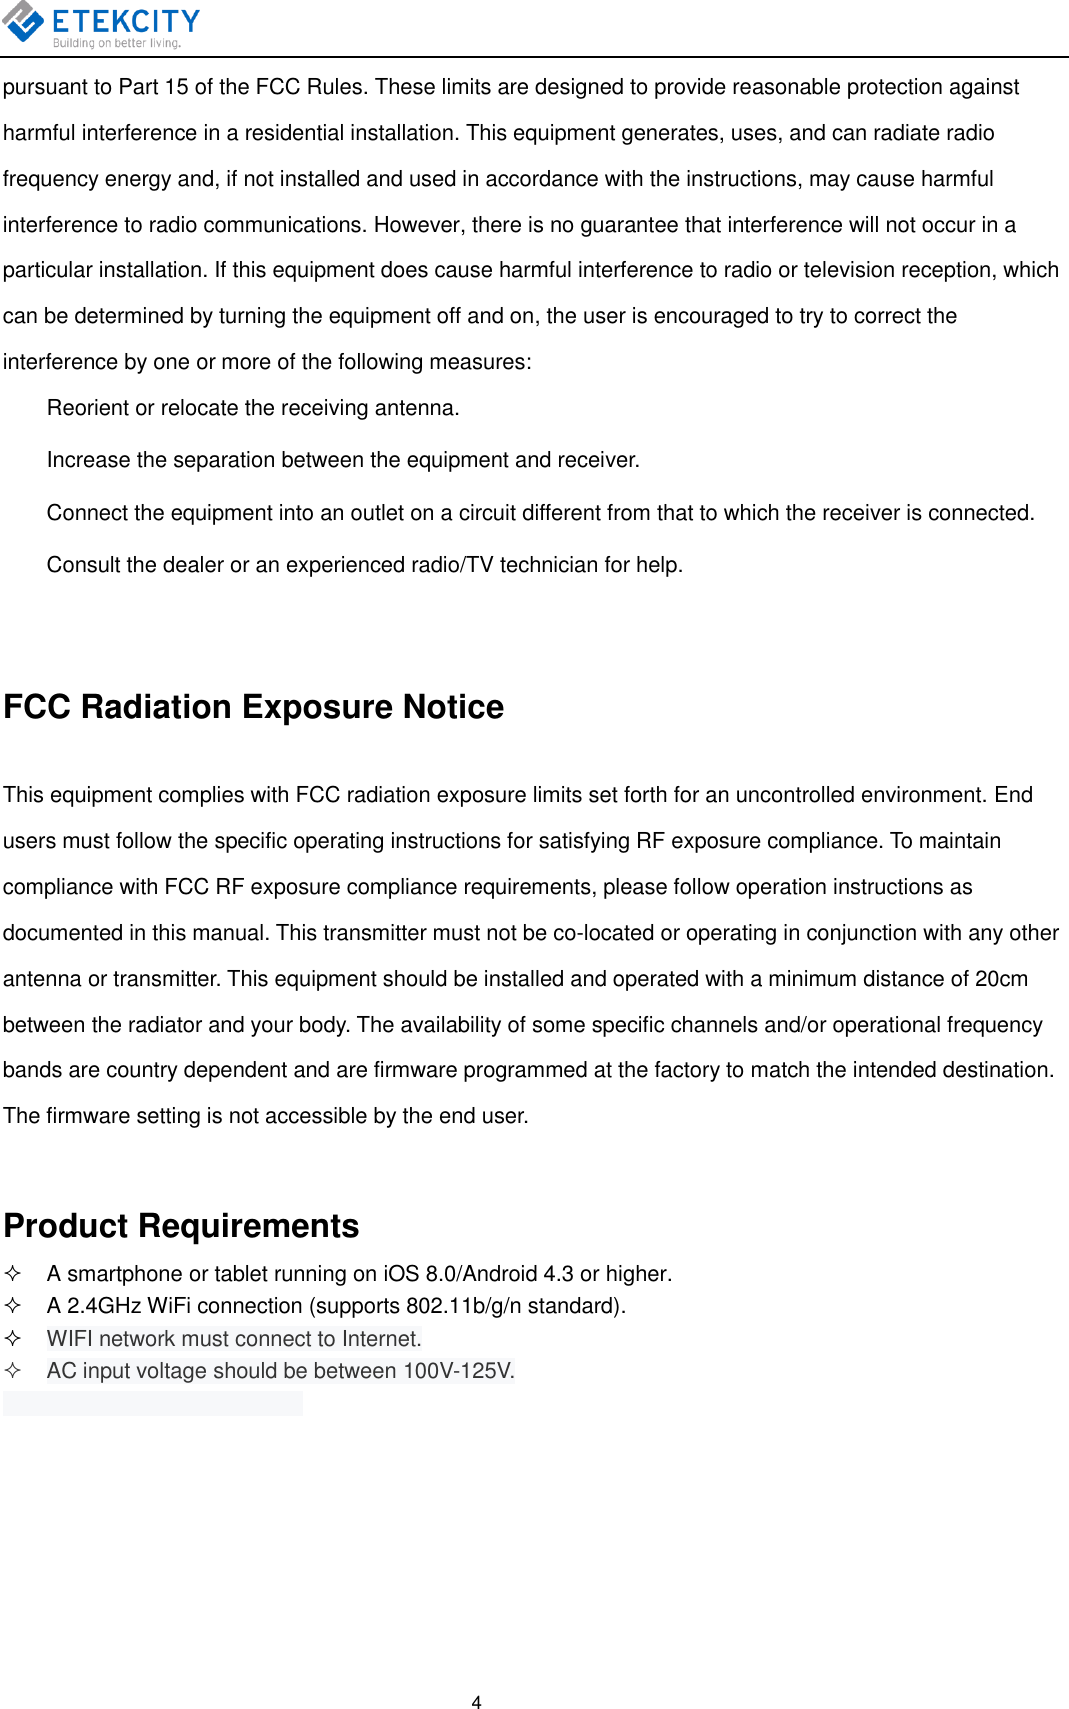    4 pursuant to Part 15 of the FCC Rules. These limits are designed to provide reasonable protection against harmful interference in a residential installation. This equipment generates, uses, and can radiate radio frequency energy and, if not installed and used in accordance with the instructions, may cause harmful interference to radio communications. However, there is no guarantee that interference will not occur in a particular installation. If this equipment does cause harmful interference to radio or television reception, which can be determined by turning the equipment off and on, the user is encouraged to try to correct the interference by one or more of the following measures:   Reorient or relocate the receiving antenna.   Increase the separation between the equipment and receiver.   Connect the equipment into an outlet on a circuit different from that to which the receiver is connected.   Consult the dealer or an experienced radio/TV technician for help.  FCC Radiation Exposure Notice This equipment complies with FCC radiation exposure limits set forth for an uncontrolled environment. End users must follow the specific operating instructions for satisfying RF exposure compliance. To maintain compliance with FCC RF exposure compliance requirements, please follow operation instructions as documented in this manual. This transmitter must not be co-located or operating in conjunction with any other antenna or transmitter. This equipment should be installed and operated with a minimum distance of 20cm between the radiator and your body. The availability of some specific channels and/or operational frequency bands are country dependent and are firmware programmed at the factory to match the intended destination. The firmware setting is not accessible by the end user.  Product Requirements   A smartphone or tablet running on iOS 8.0/Android 4.3 or higher.   A 2.4GHz WiFi connection (supports 802.11b/g/n standard).  WIFI network must connect to Internet.   AC input voltage should be between 100V-125V.    